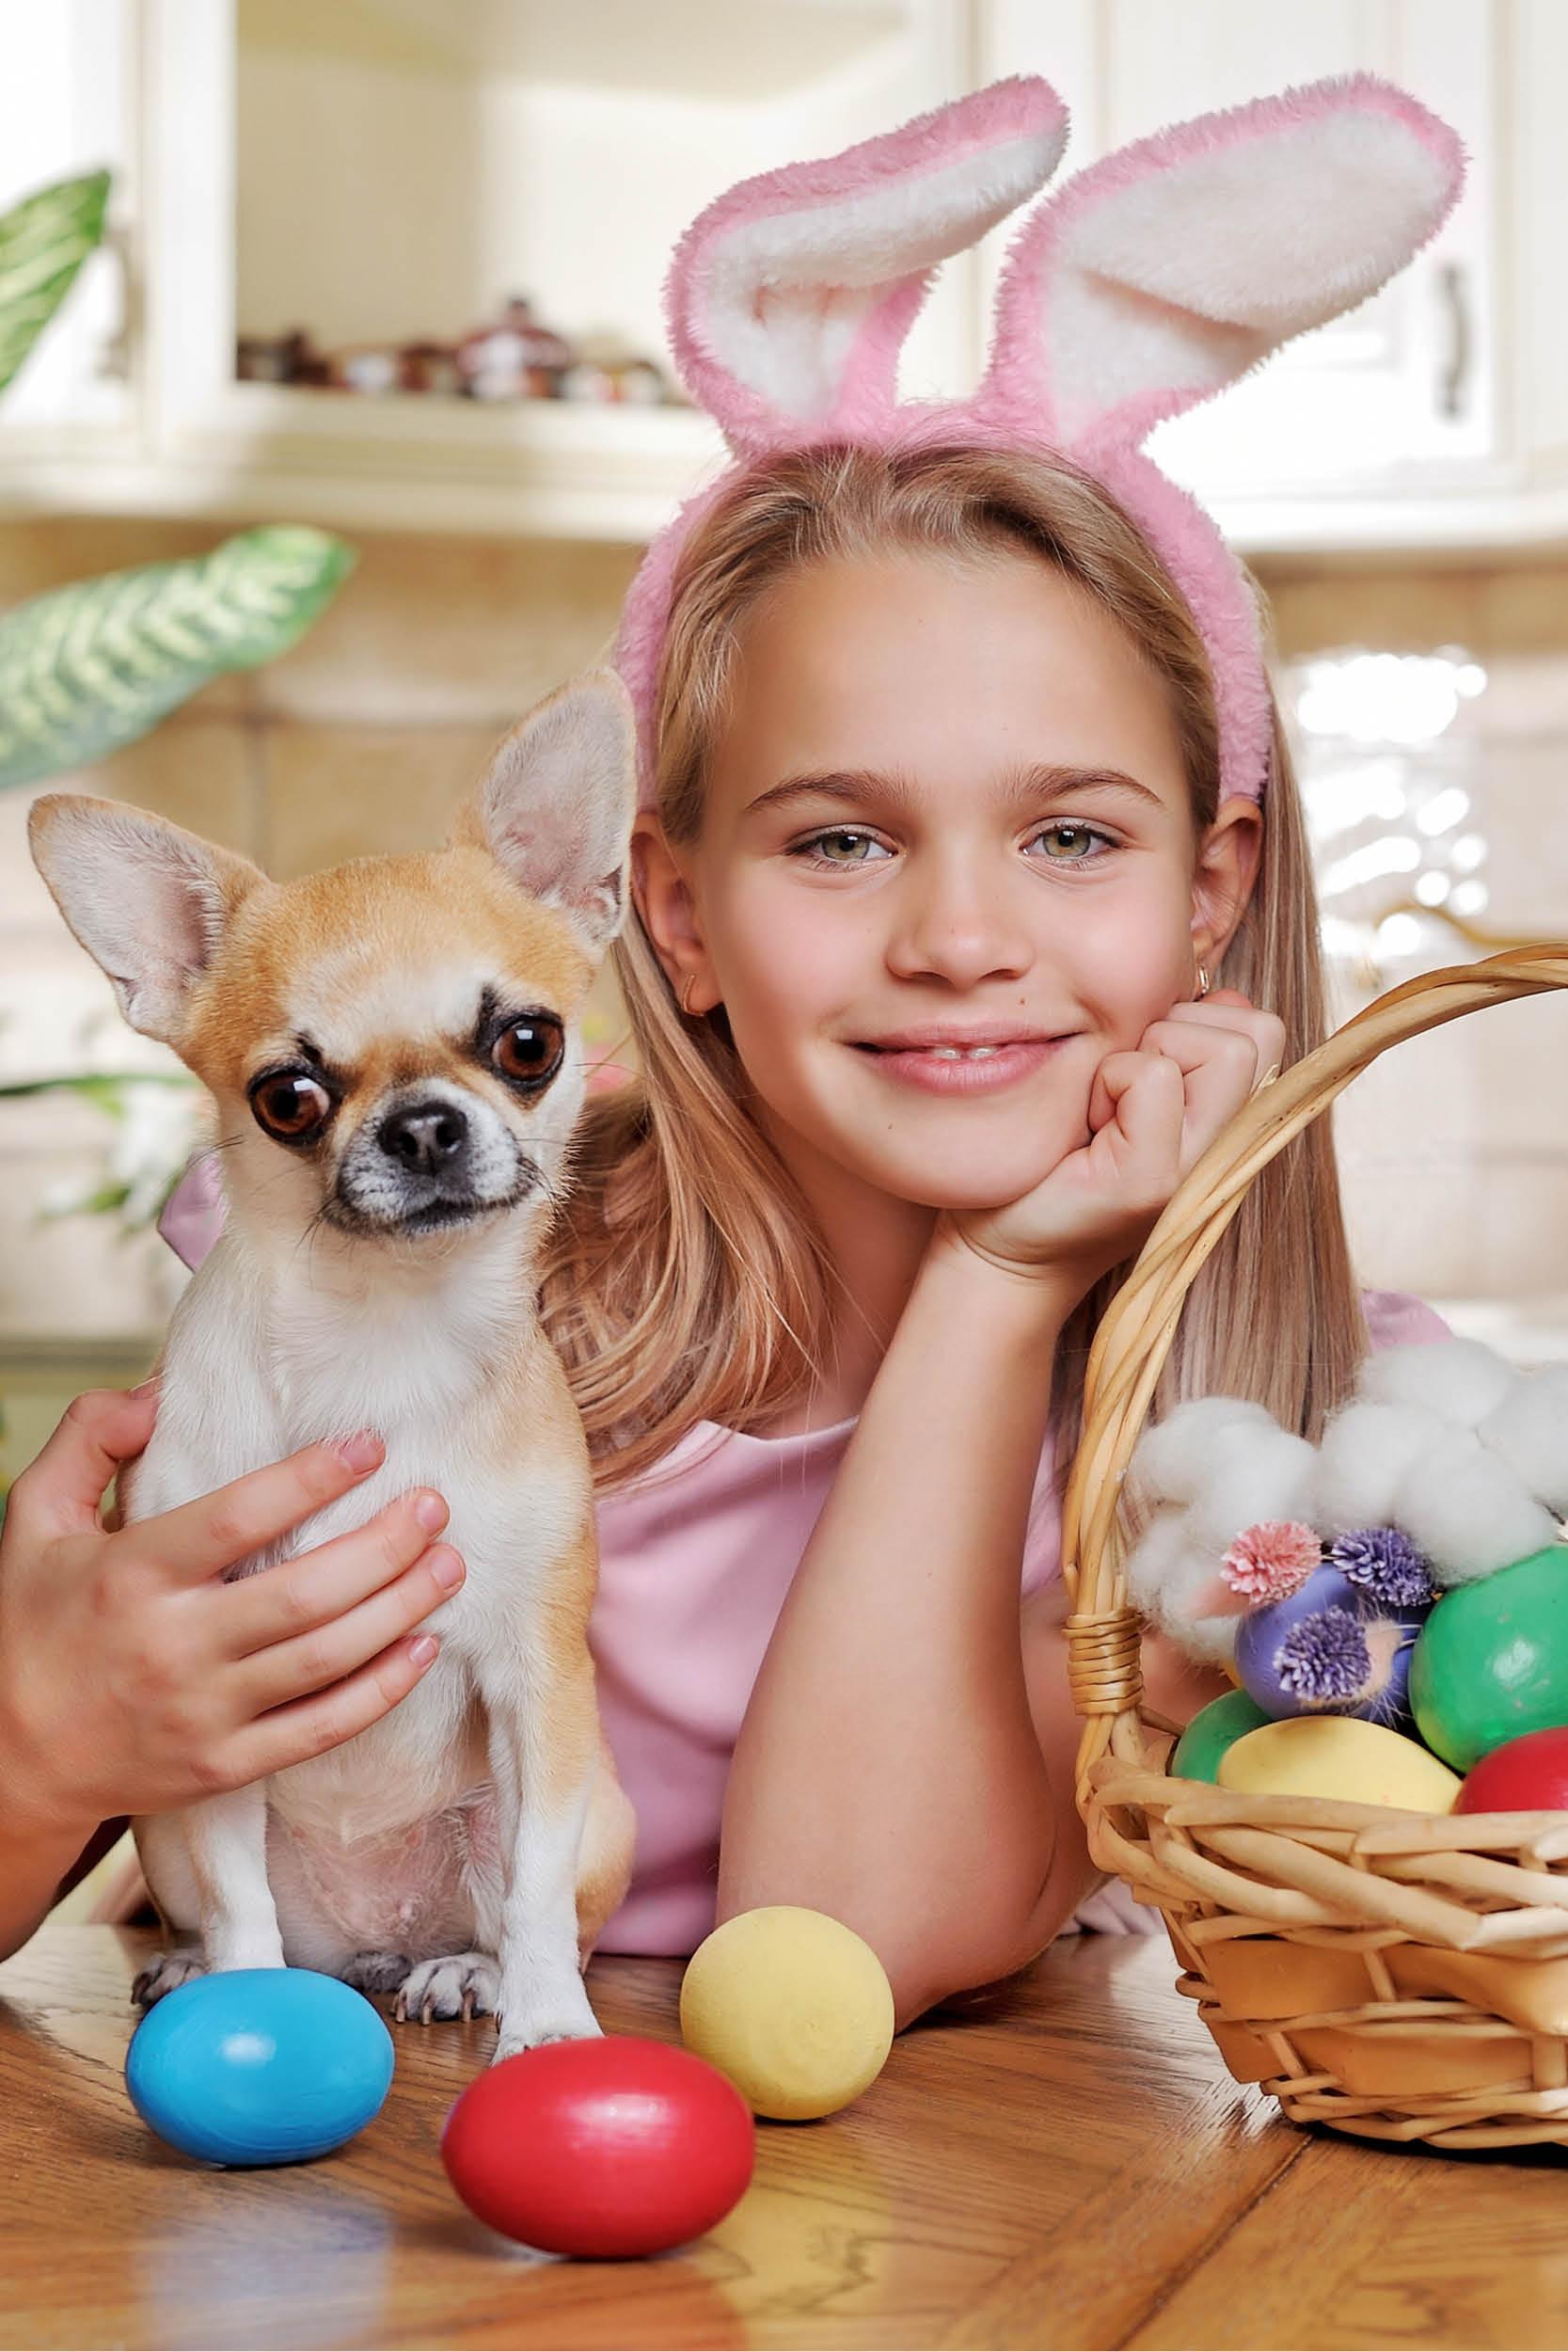 Celebrating Easter with your dog